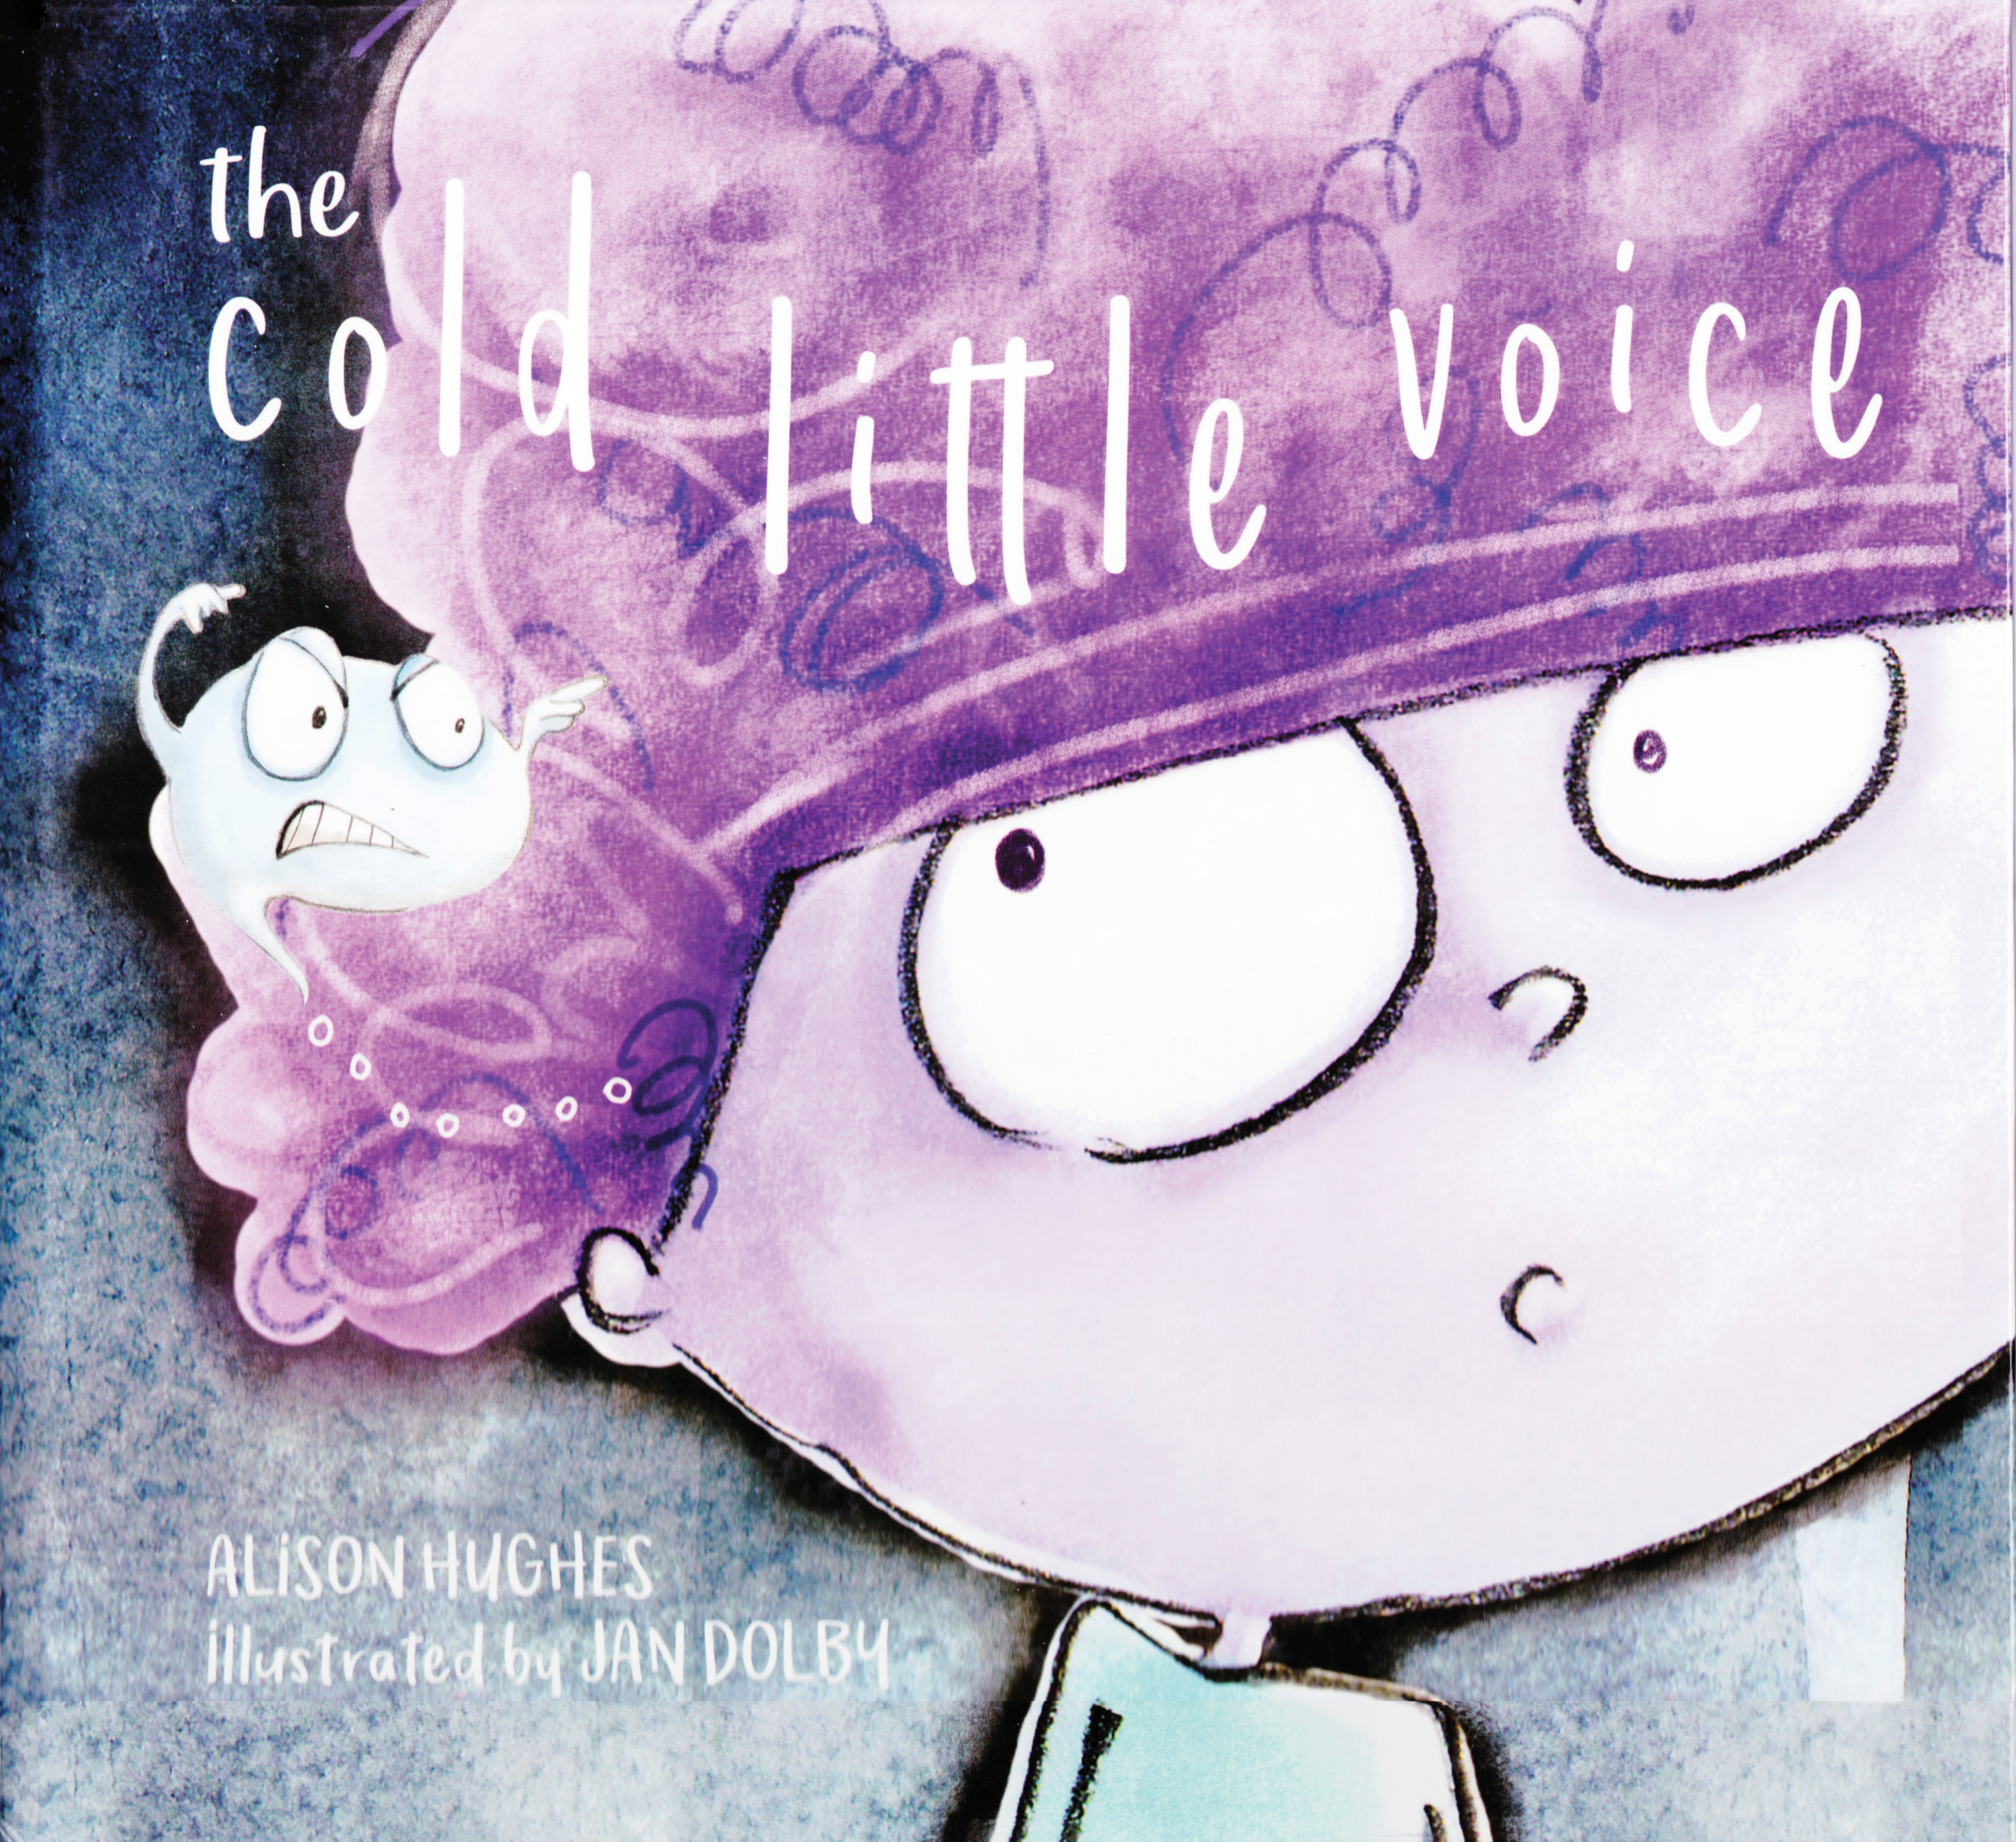 Photo of a book cover for 'The Cold Little Voice.' The cover is an illustration of a little creature on a person's head.